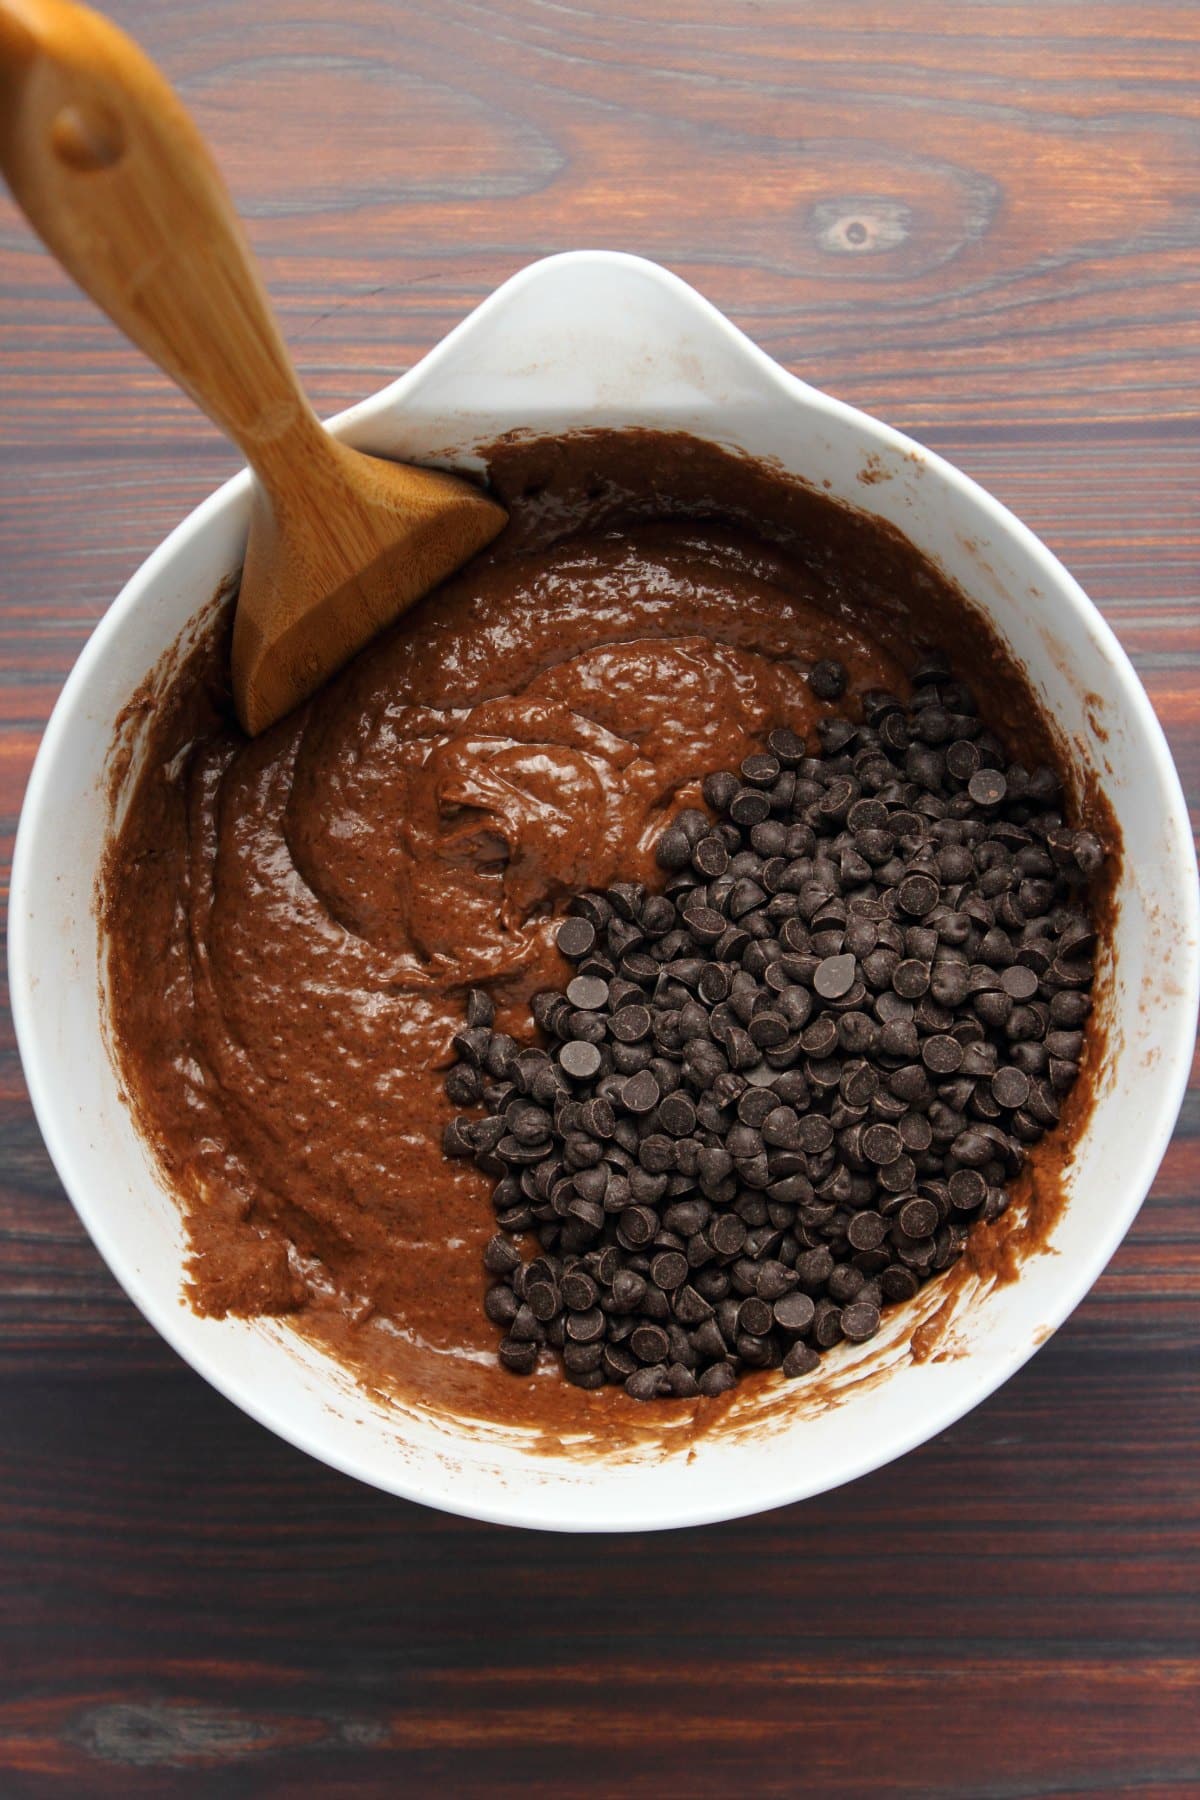 Chocolate chips added to batter in mixing bowl.